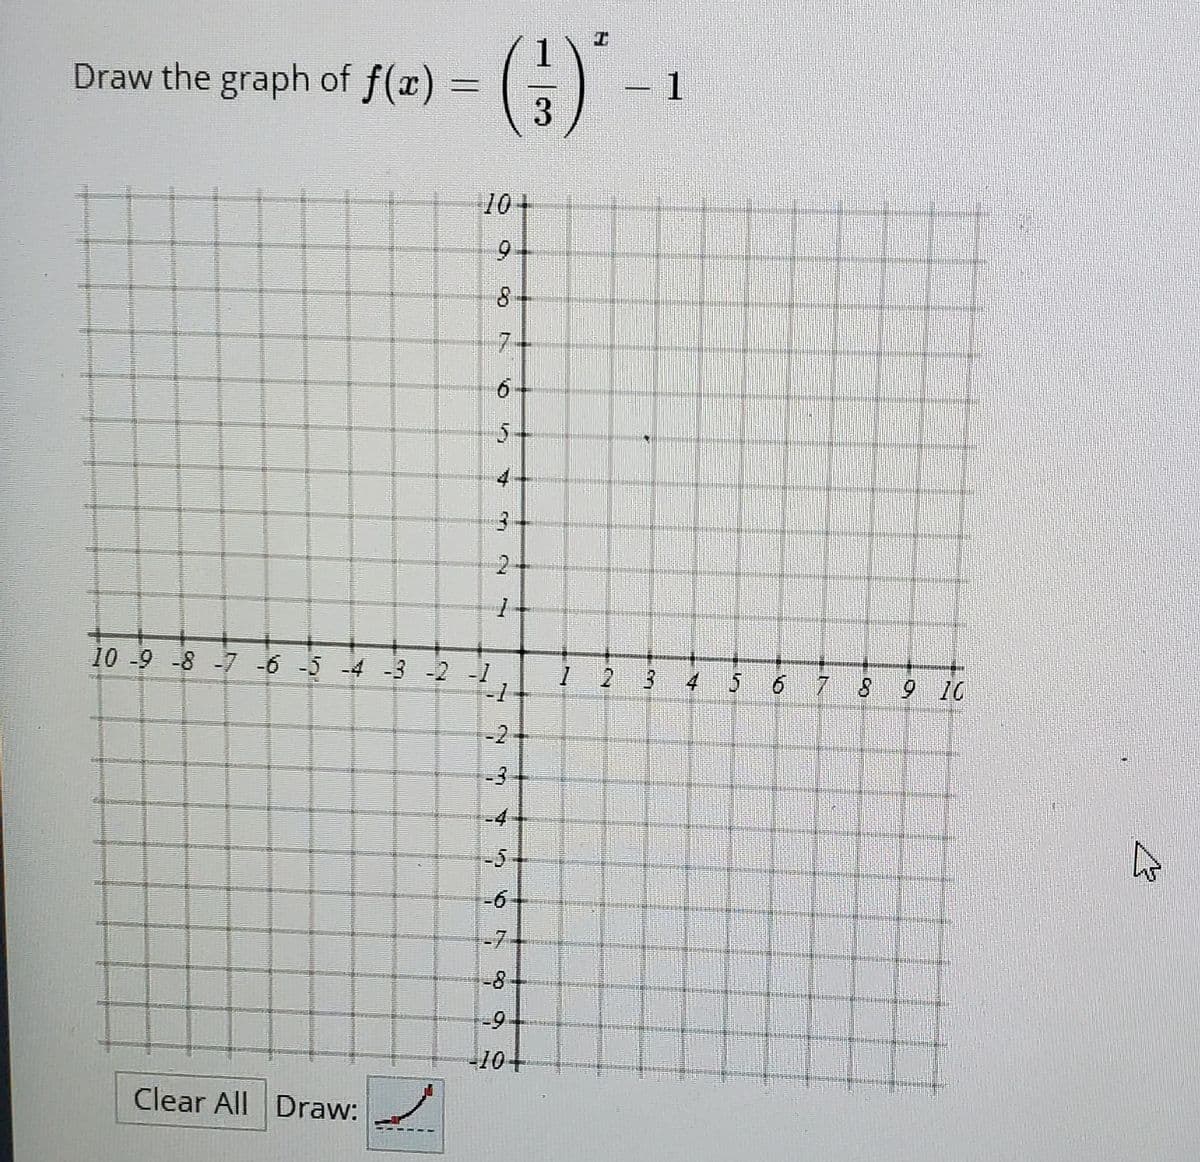 (G)'-
1
Draw the graph of f(x) =
3
10
6.
7-
5.
2
10 -9 -8 -7 -6 -5 -4 -3 -2 -1
1 2 3
-1
4 5 6 7 8
9 10
-2
-3
-D4
-5
-7-
-8
-9
-104
Clear All Draw:
